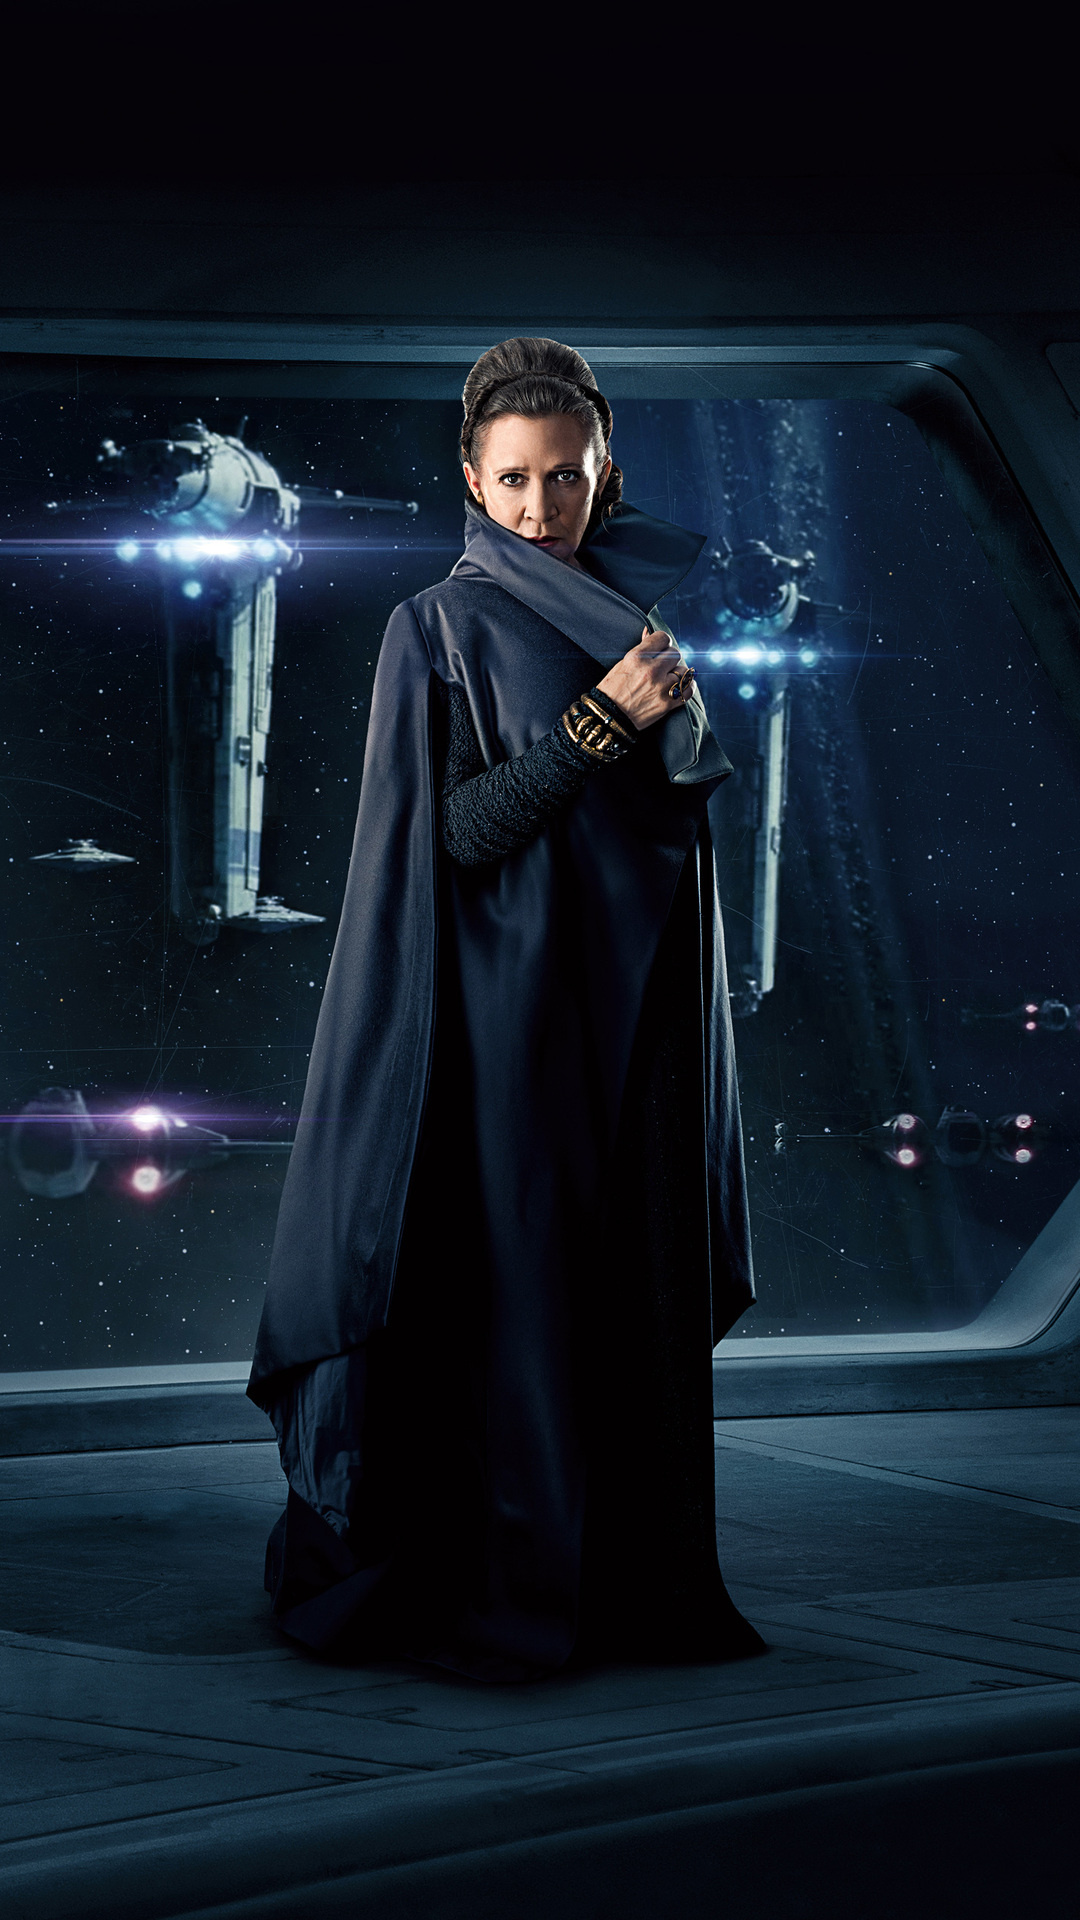 Princess Leia: A founder and General of the Resistance against the First Orden. 1080x1920 Full HD Background.